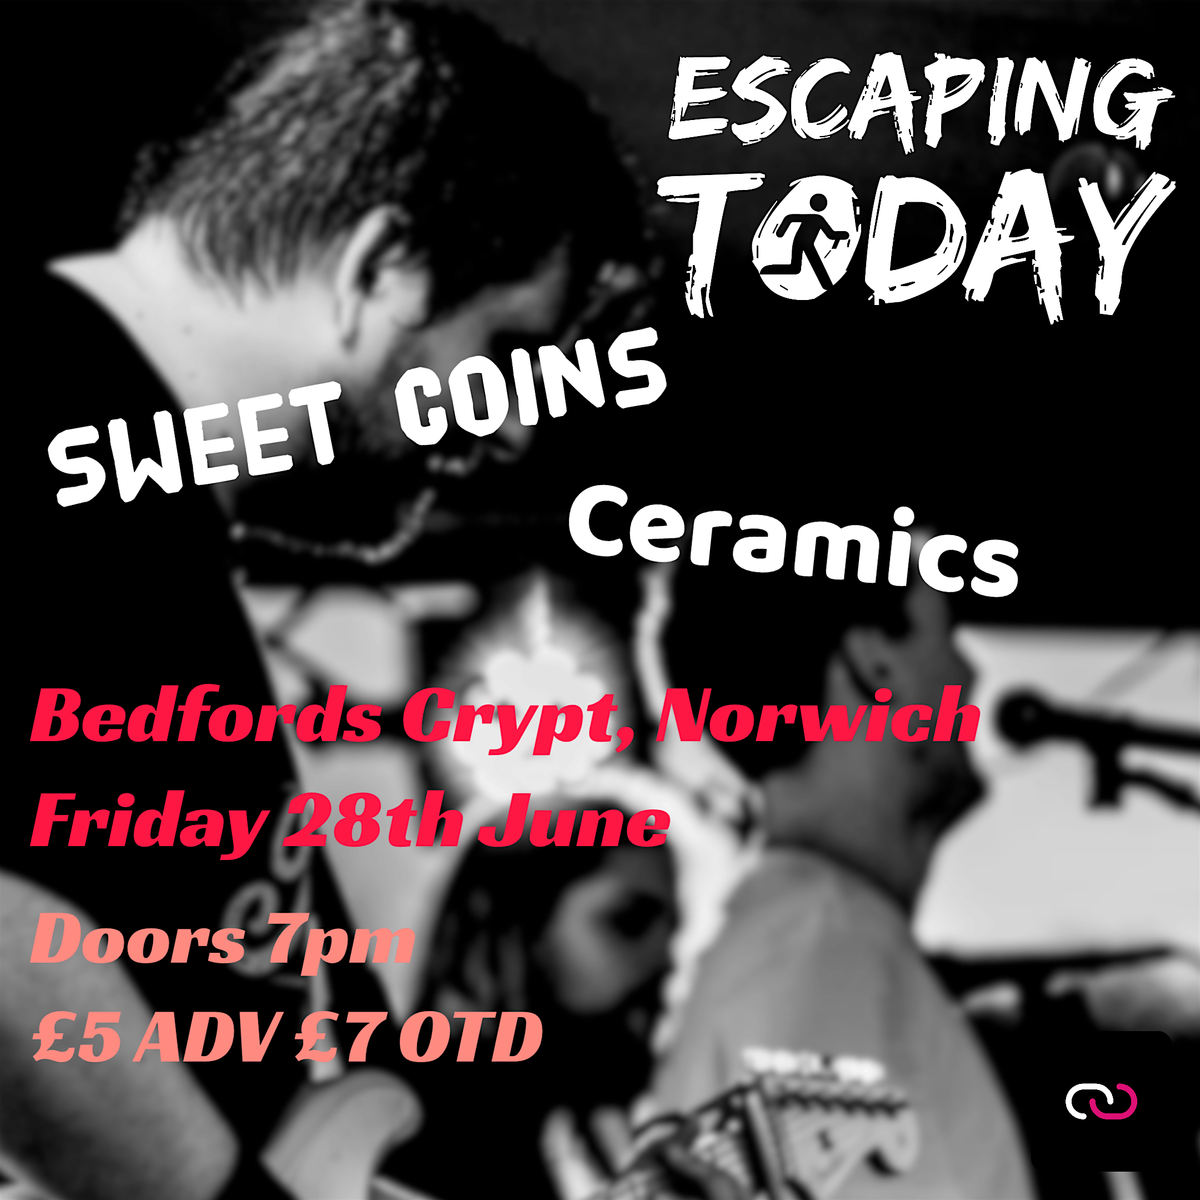 Escaping Today \/ Sweet Coins \/ Ceramics @ Bedfords Crypt, Norwich